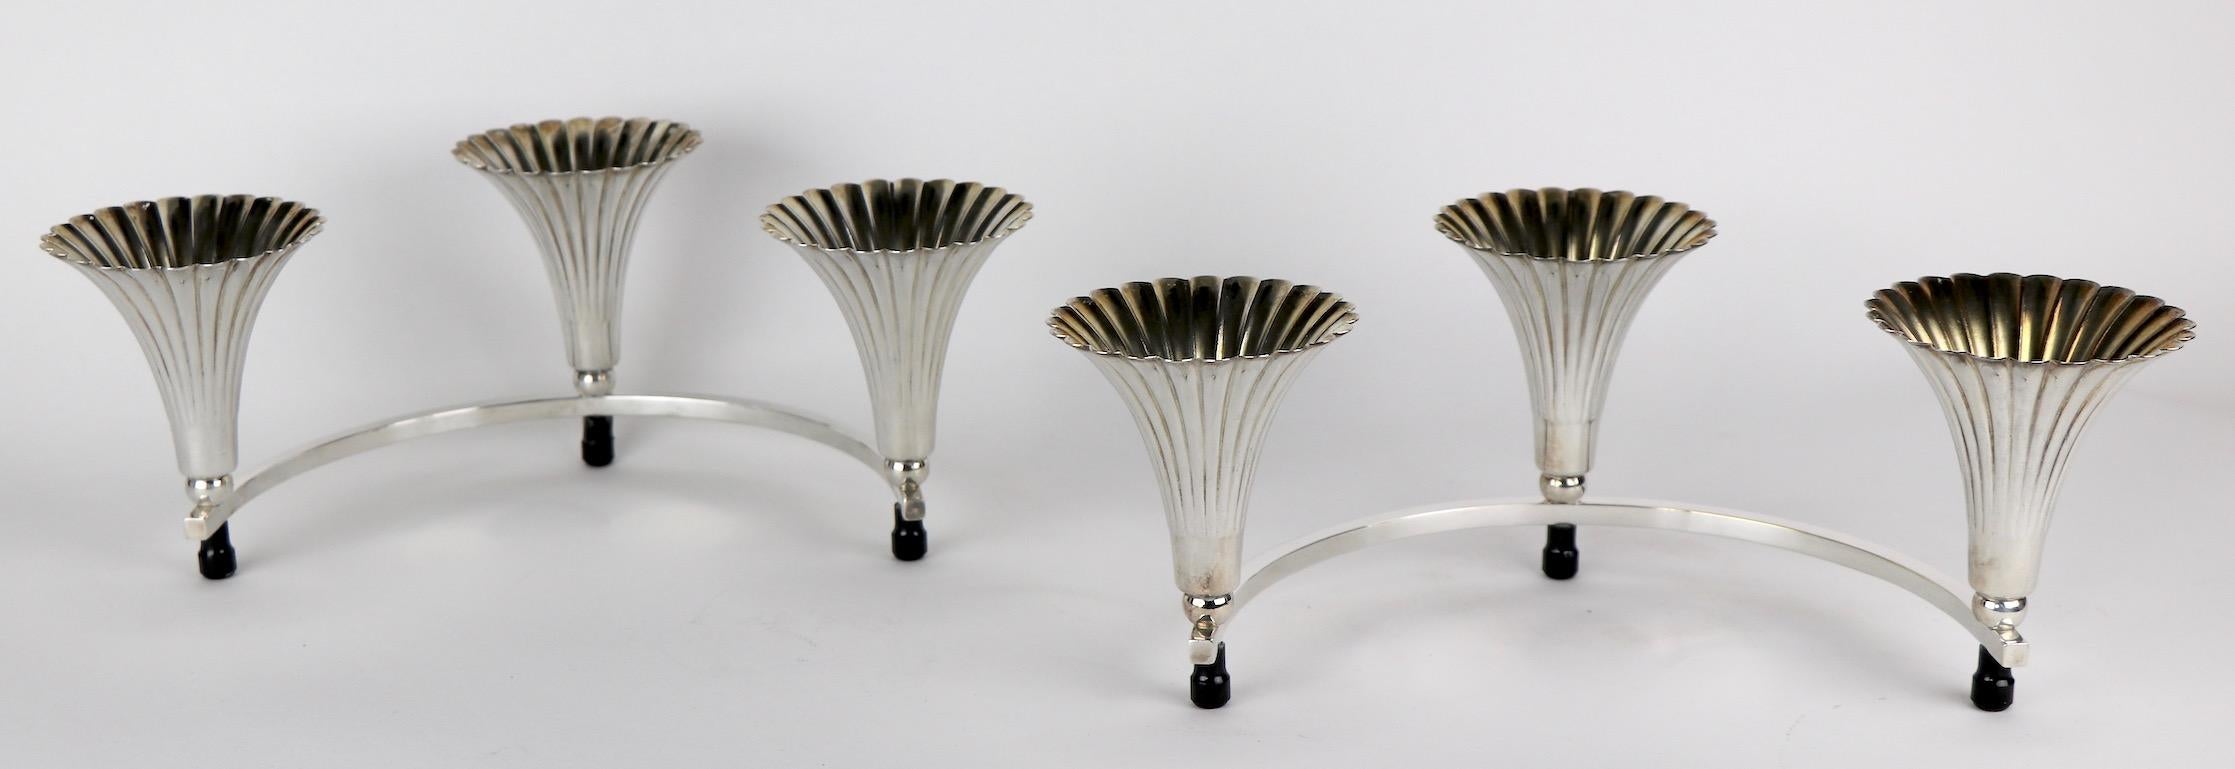 20th Century Pair of Silver Plate Candlesticks by Sheffield